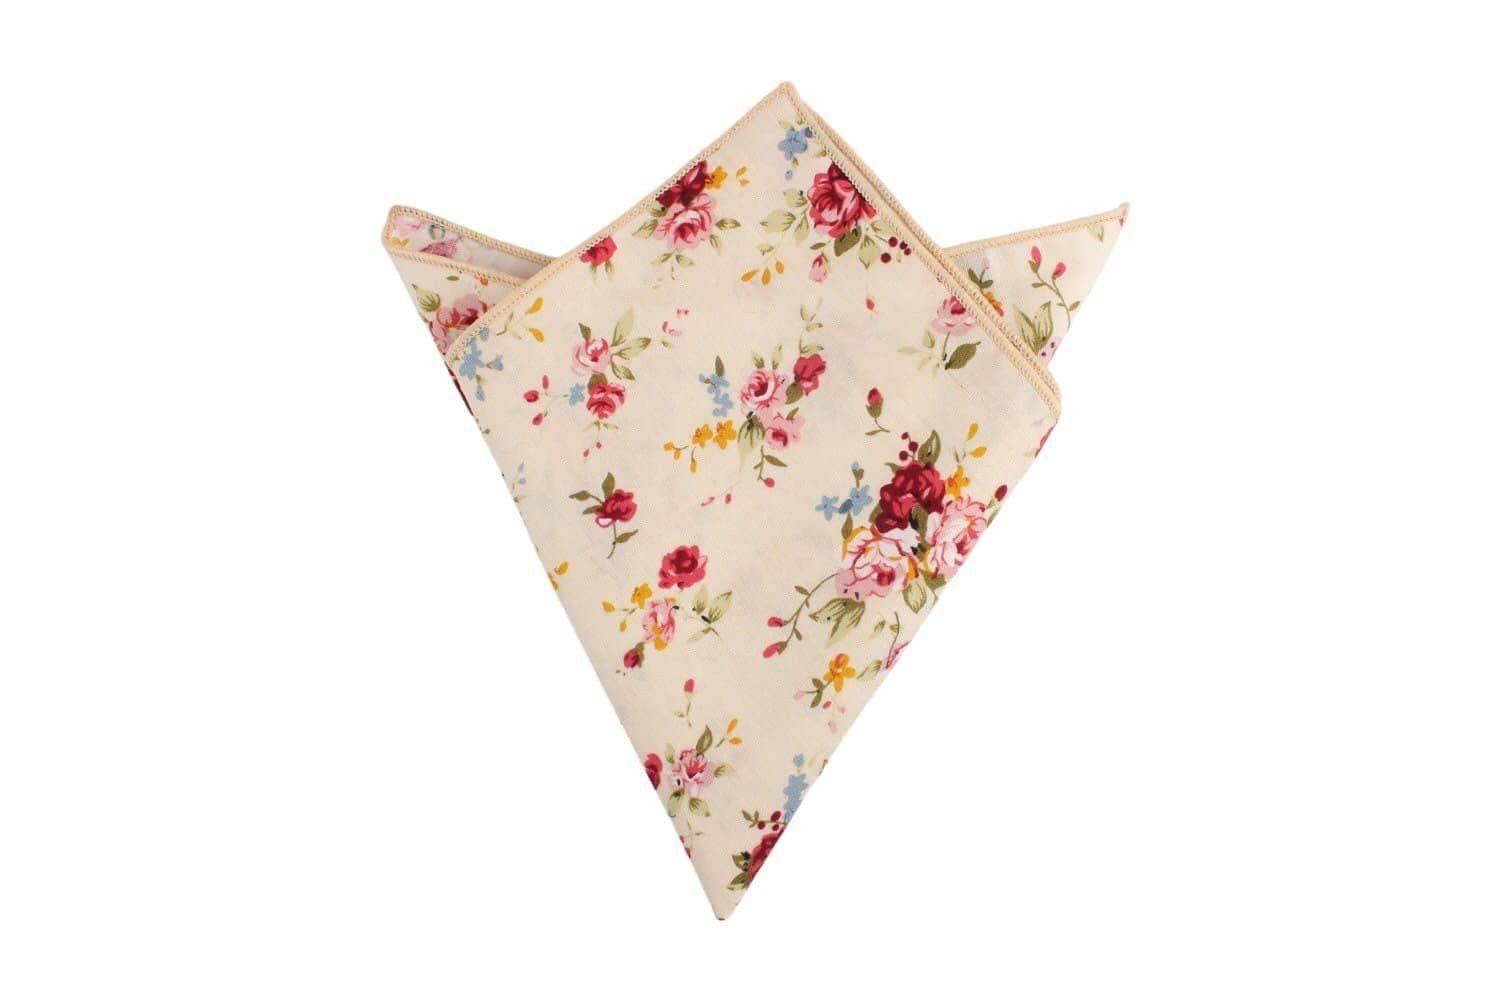 Cream Floral Pocket Square JONAH Mytieshop Cream Floral Pocket SquareMaterial CottonItem Length: 23 cm ( 9 inches)Item Width : 22 cm (8.6 inches) A dashing way to top off your tuxedo. This floral pocket square is the perfect finishing touch to your wedding day ensemble. With its soft cream color and intricate floral print, it&#39;s sure to make a statement. Add a touch of personality to your look with this dashing pocket square. It&#39;s sure to make you feel like the best dressed man in the room.